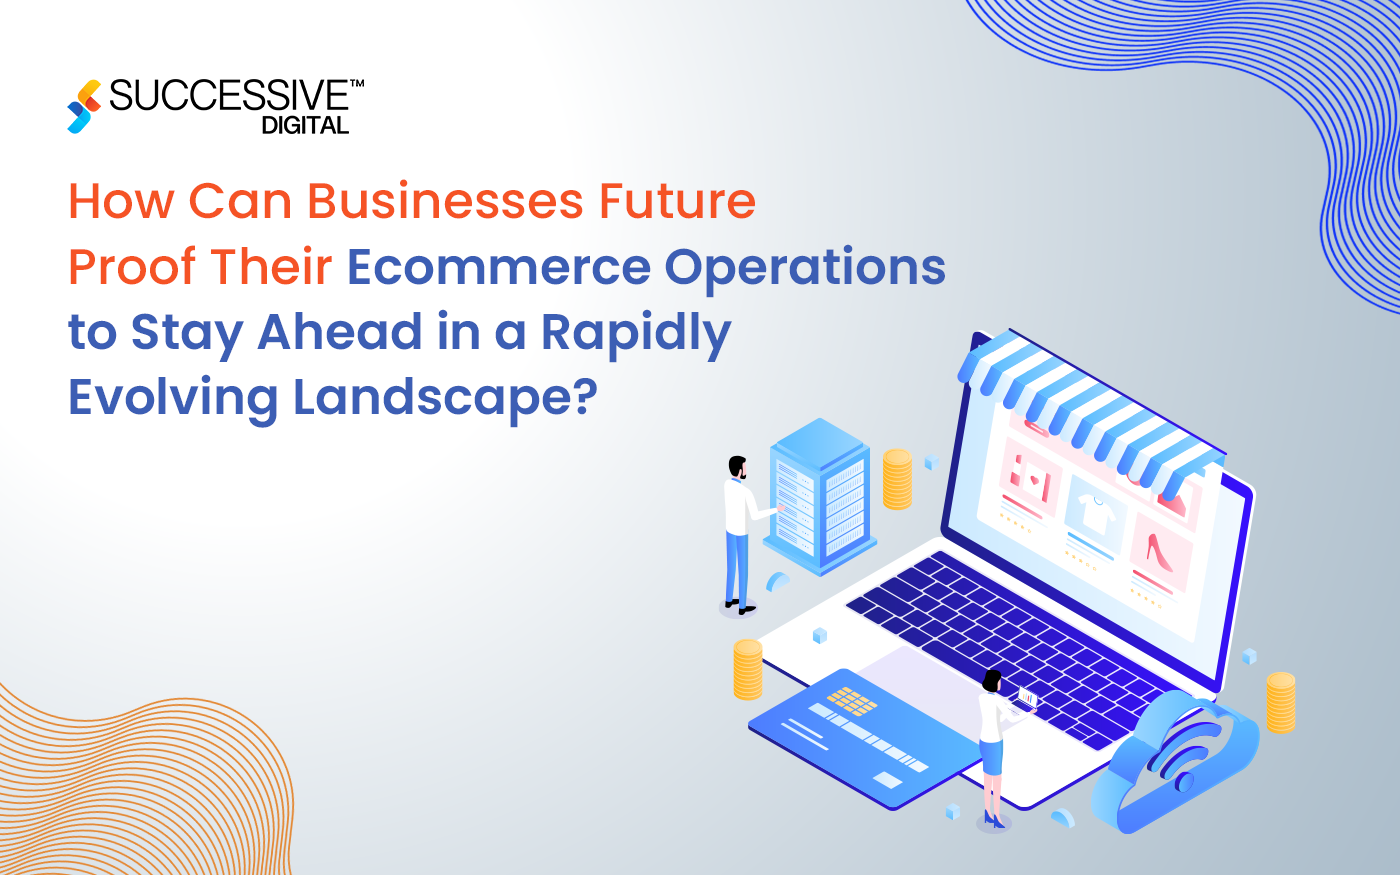 How Can Businesses Future-Proof Their Ecommerce Operations to Stay Ahead in a Rapidly Evolving Landscape?